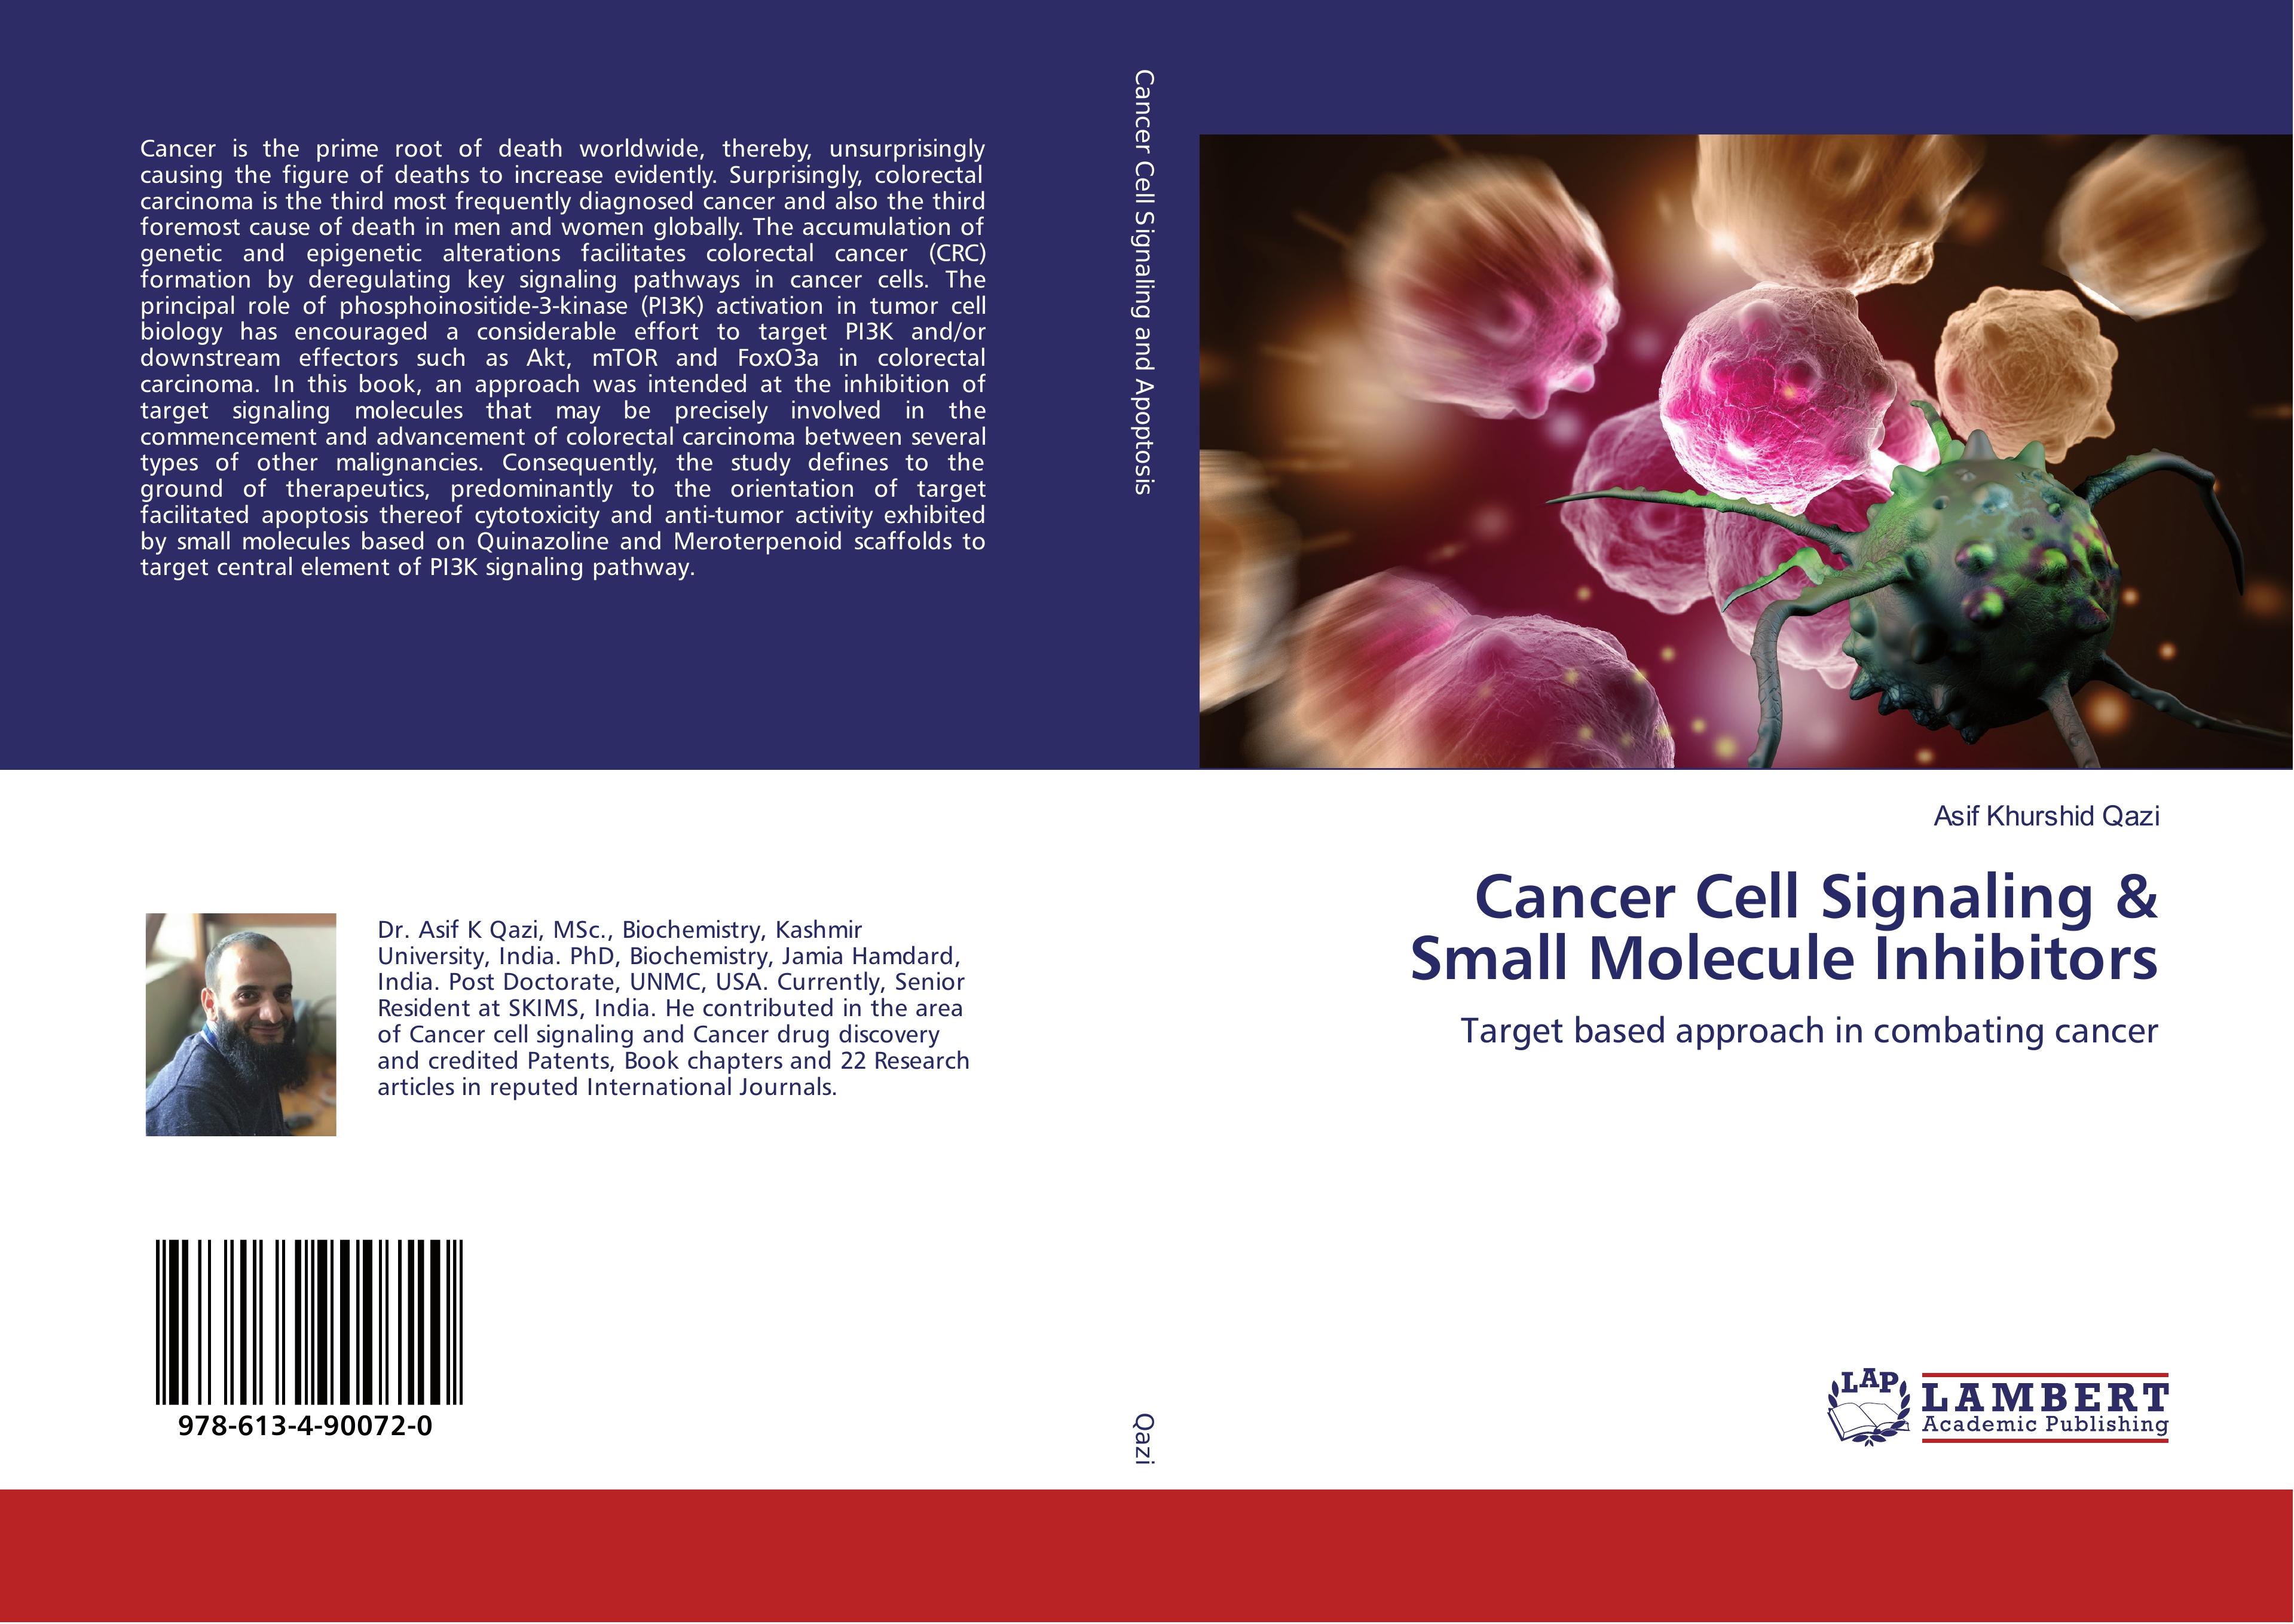 Cancer Cell Signaling & Small Molecule Inhibitors / Target based approach in combating cancer / Asif Khurshid Qazi / Taschenbuch / Paperback / 248 S. / Englisch / 2018 / EAN 9786134900720 - Qazi, Asif Khurshid